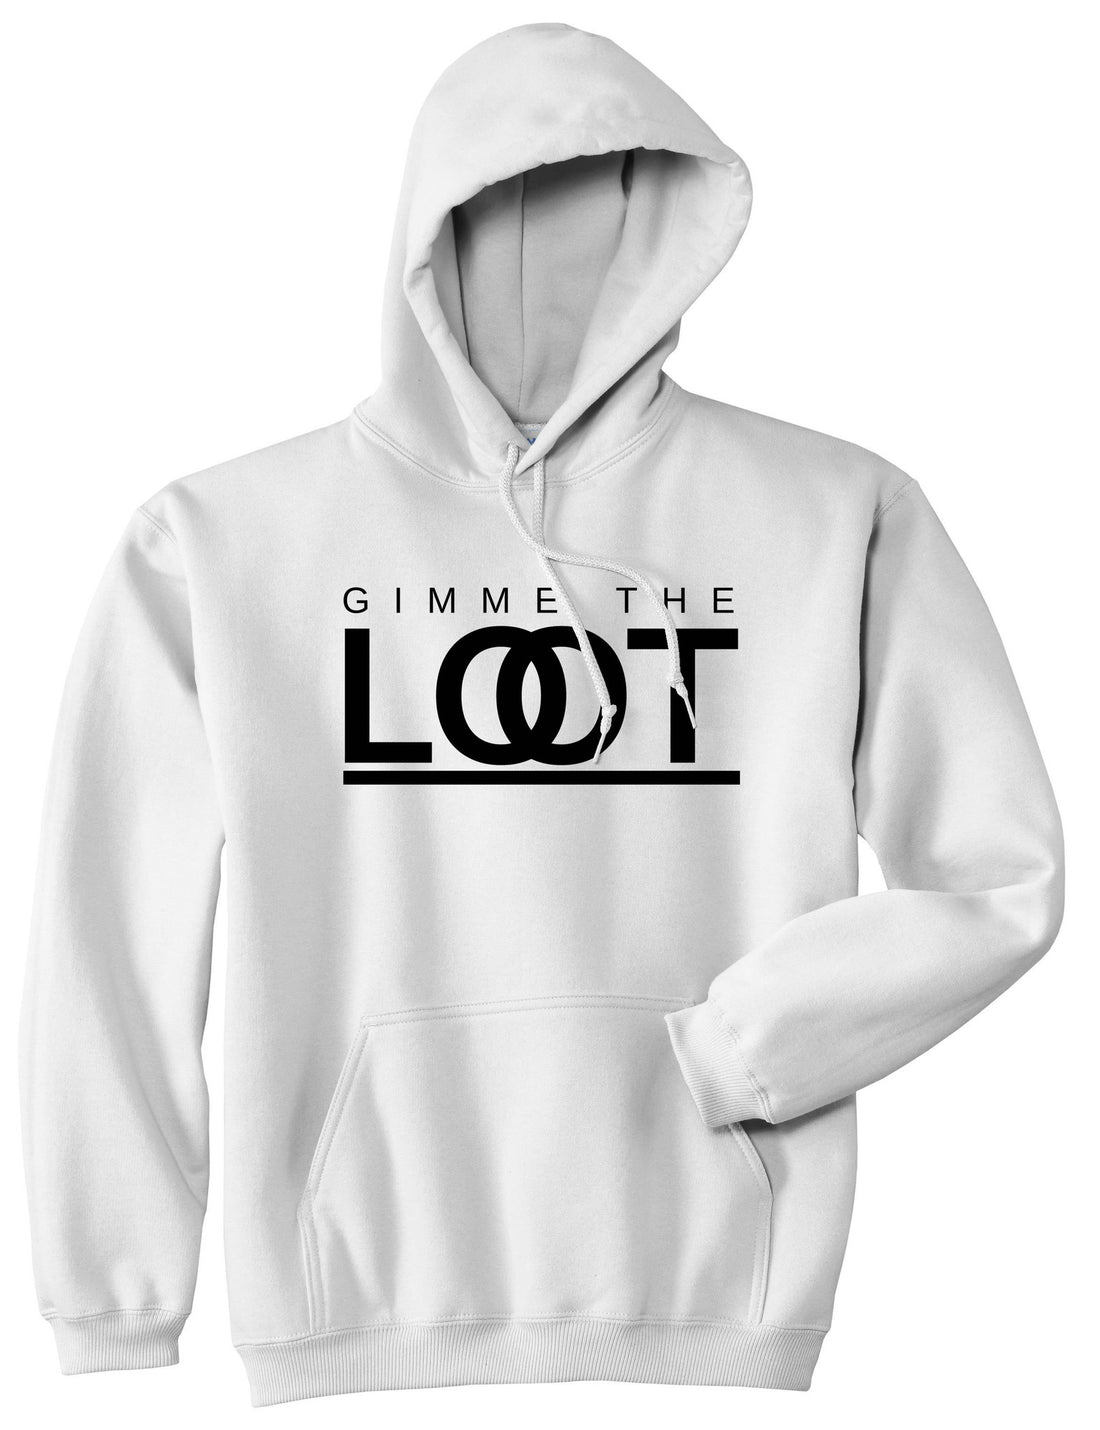 Gimme The Loot  Pullover Hoodie in White By Kings Of NY